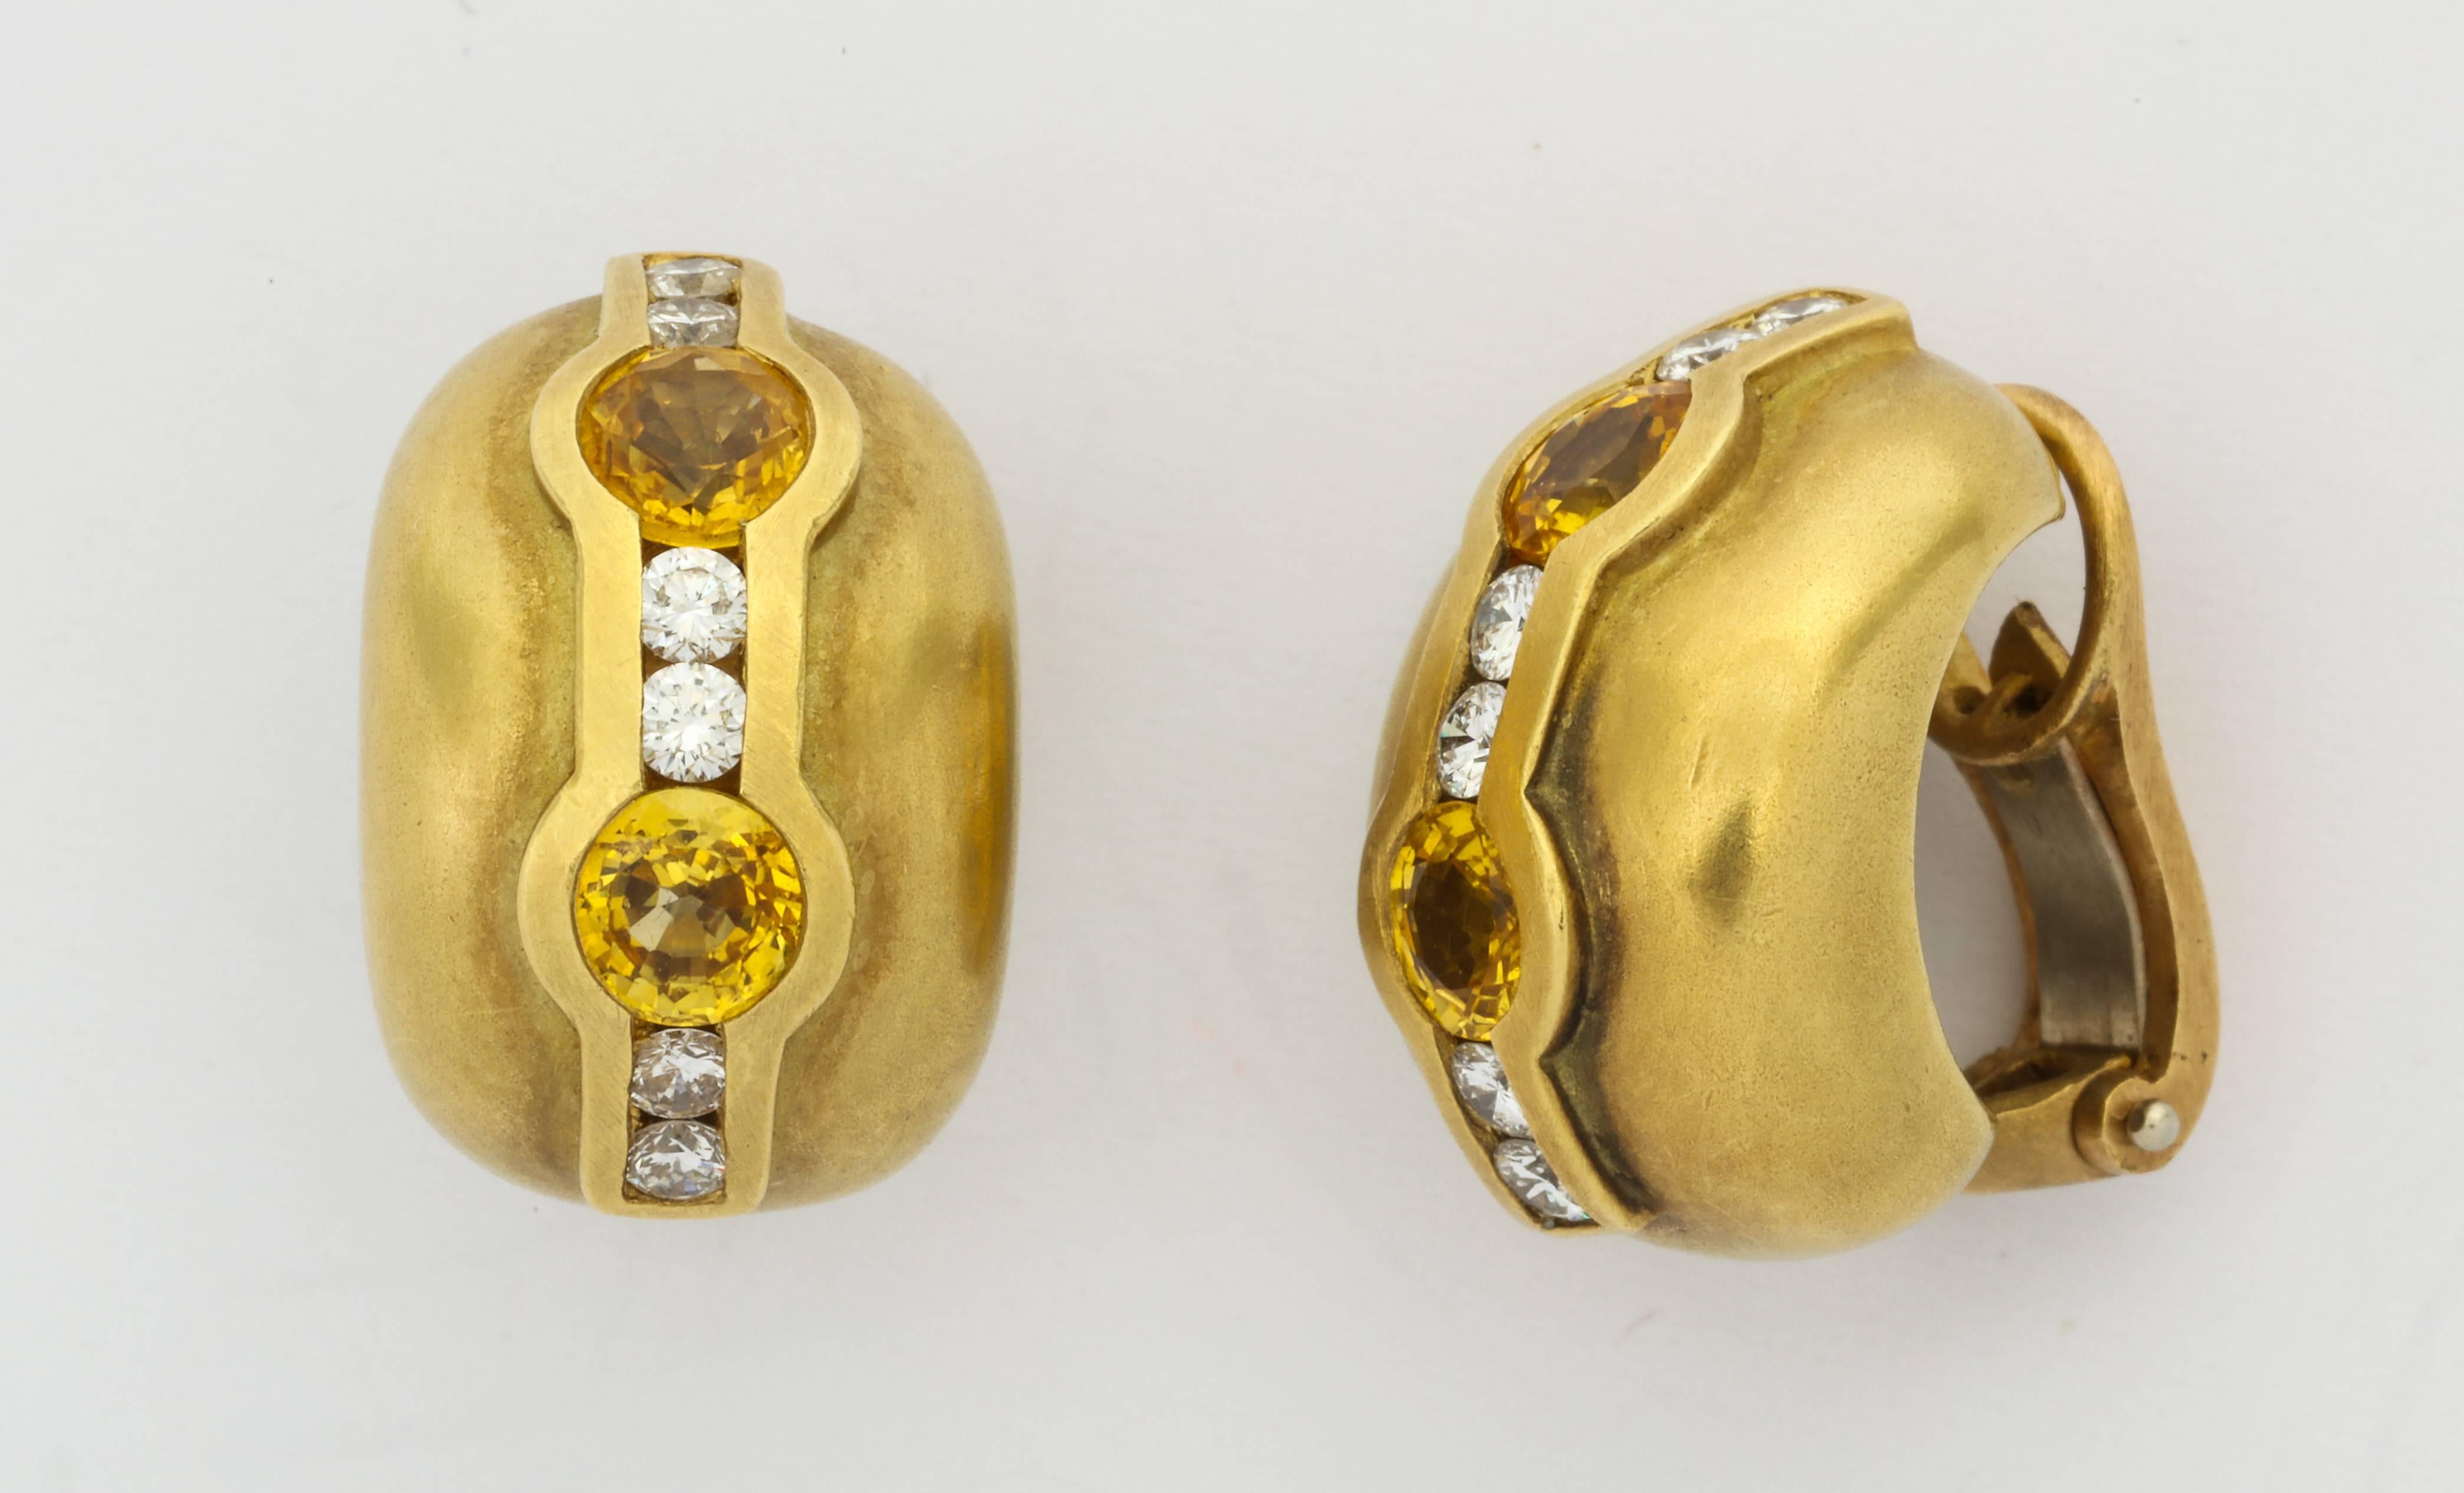 A modern and eye-catching 1997 design by award winning Barry Kieselstein Cord consisting of satin finished 18K gold ear clips set with sparkling natural yellow and white diamonds. Measuring 1/2 inch x 3/4 inch, with stamped gold mark, date, and